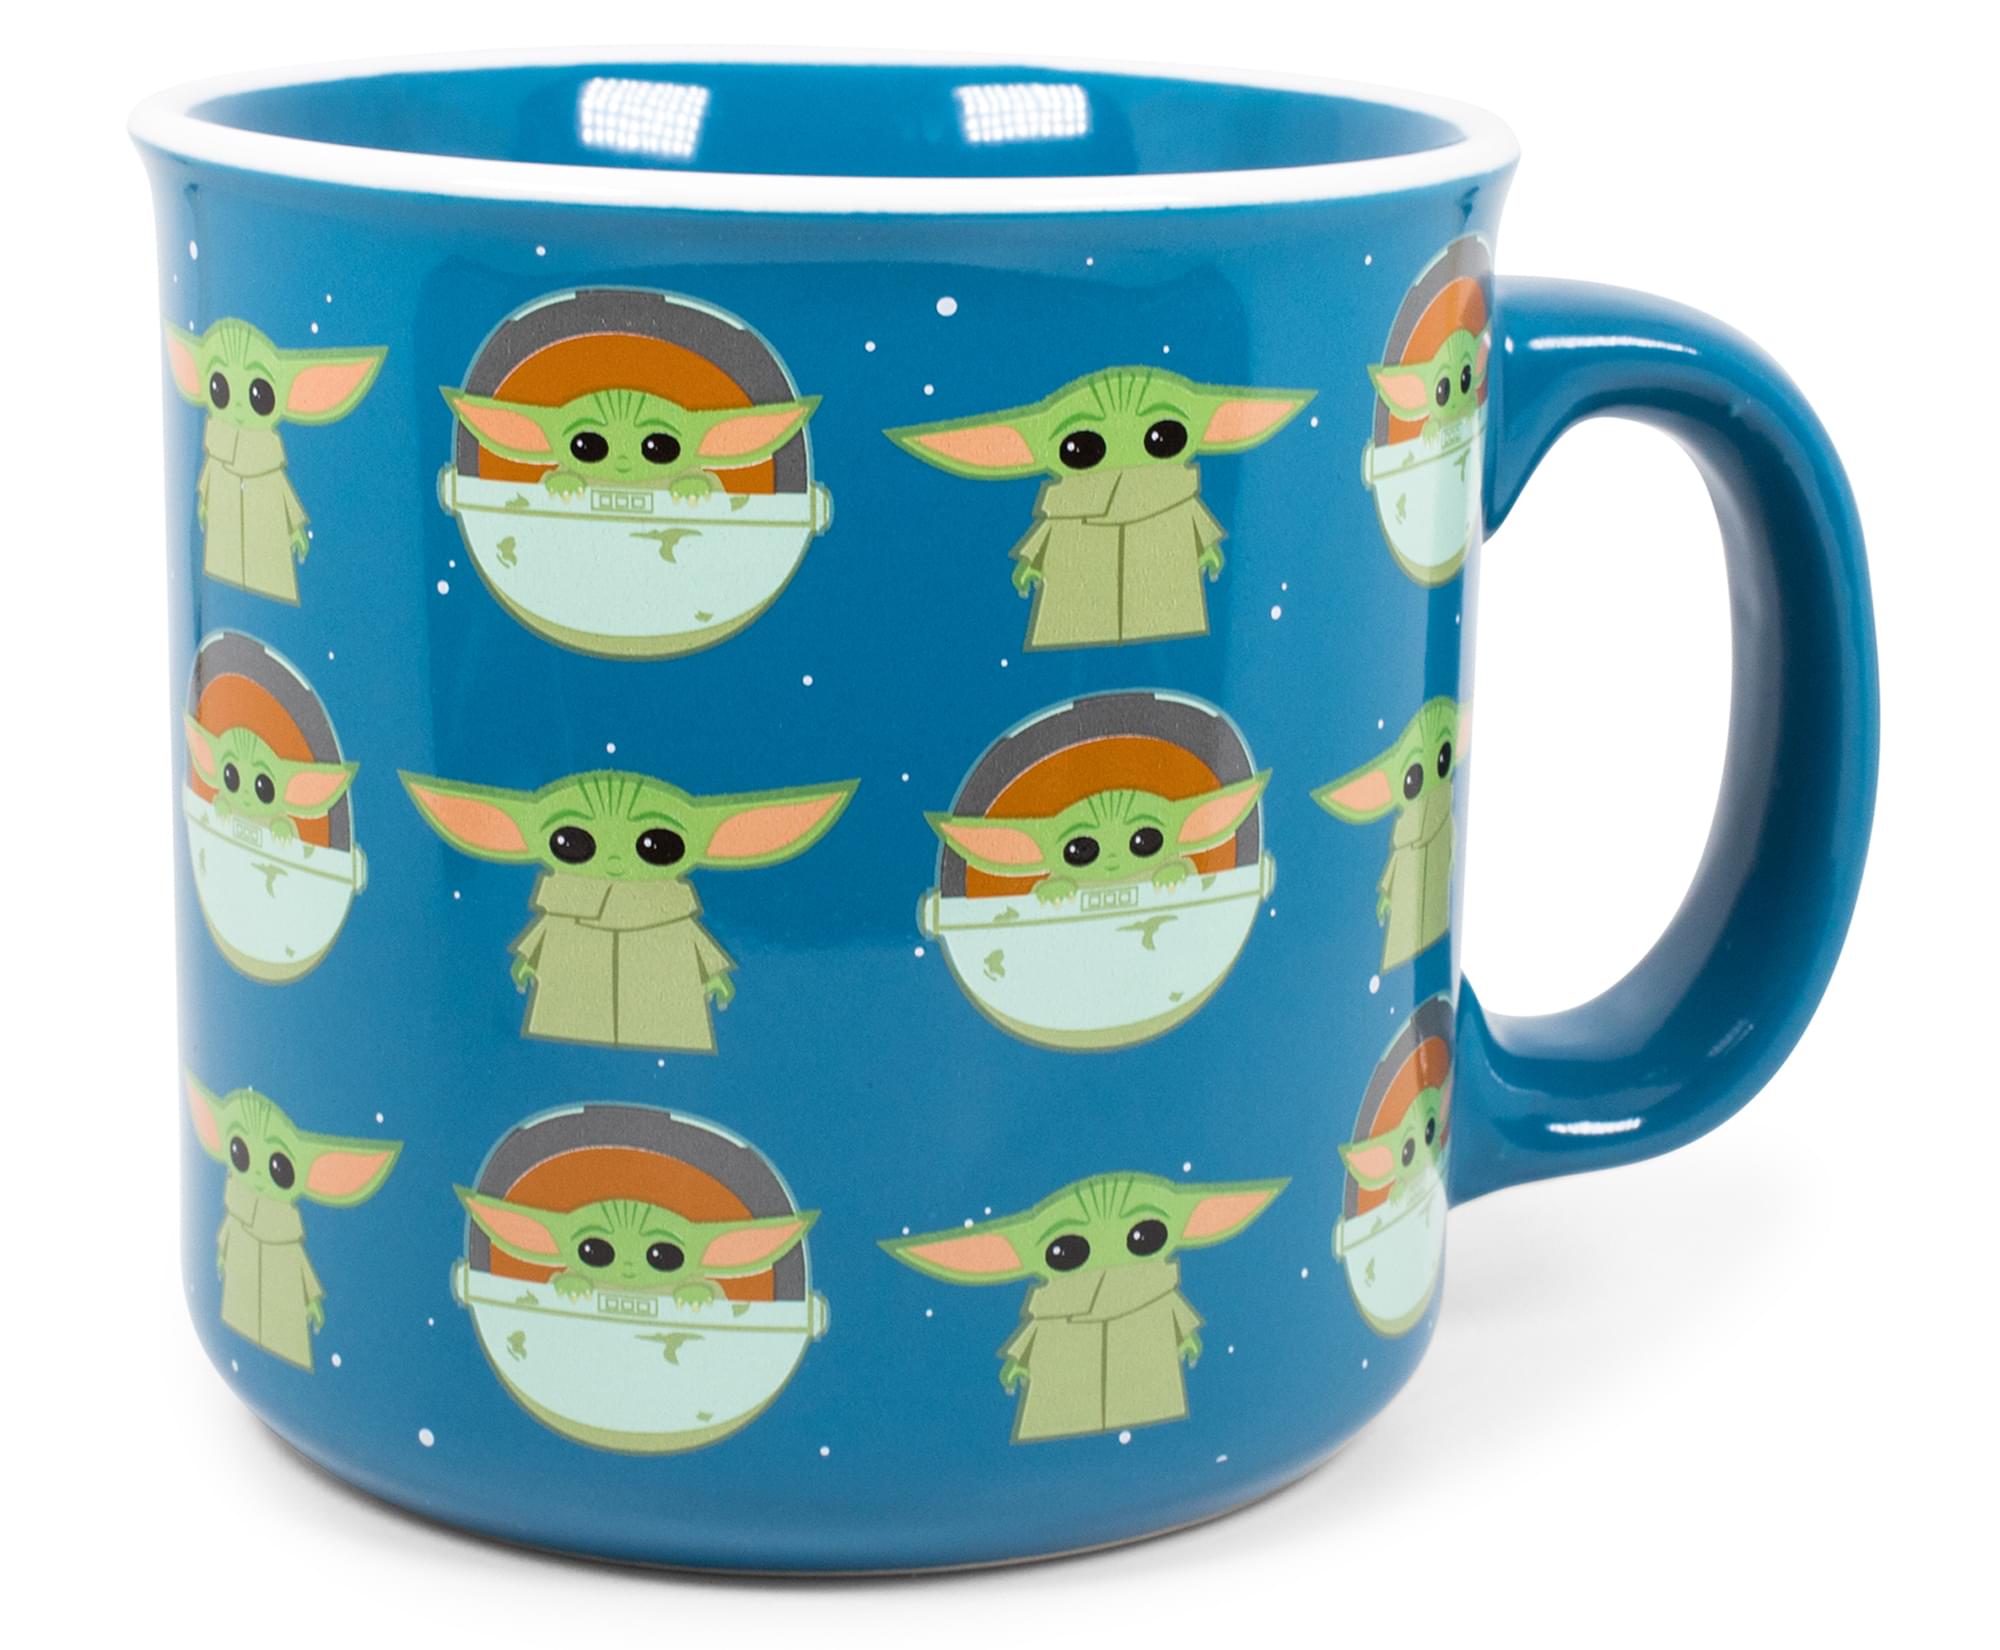 Baby Yoda Cup/ the Mandalorian Cup/ the Child Cup/ Grogu Cup/ Star Wars Cup/  Starbucks Cup/ Baby Yoda Gift 